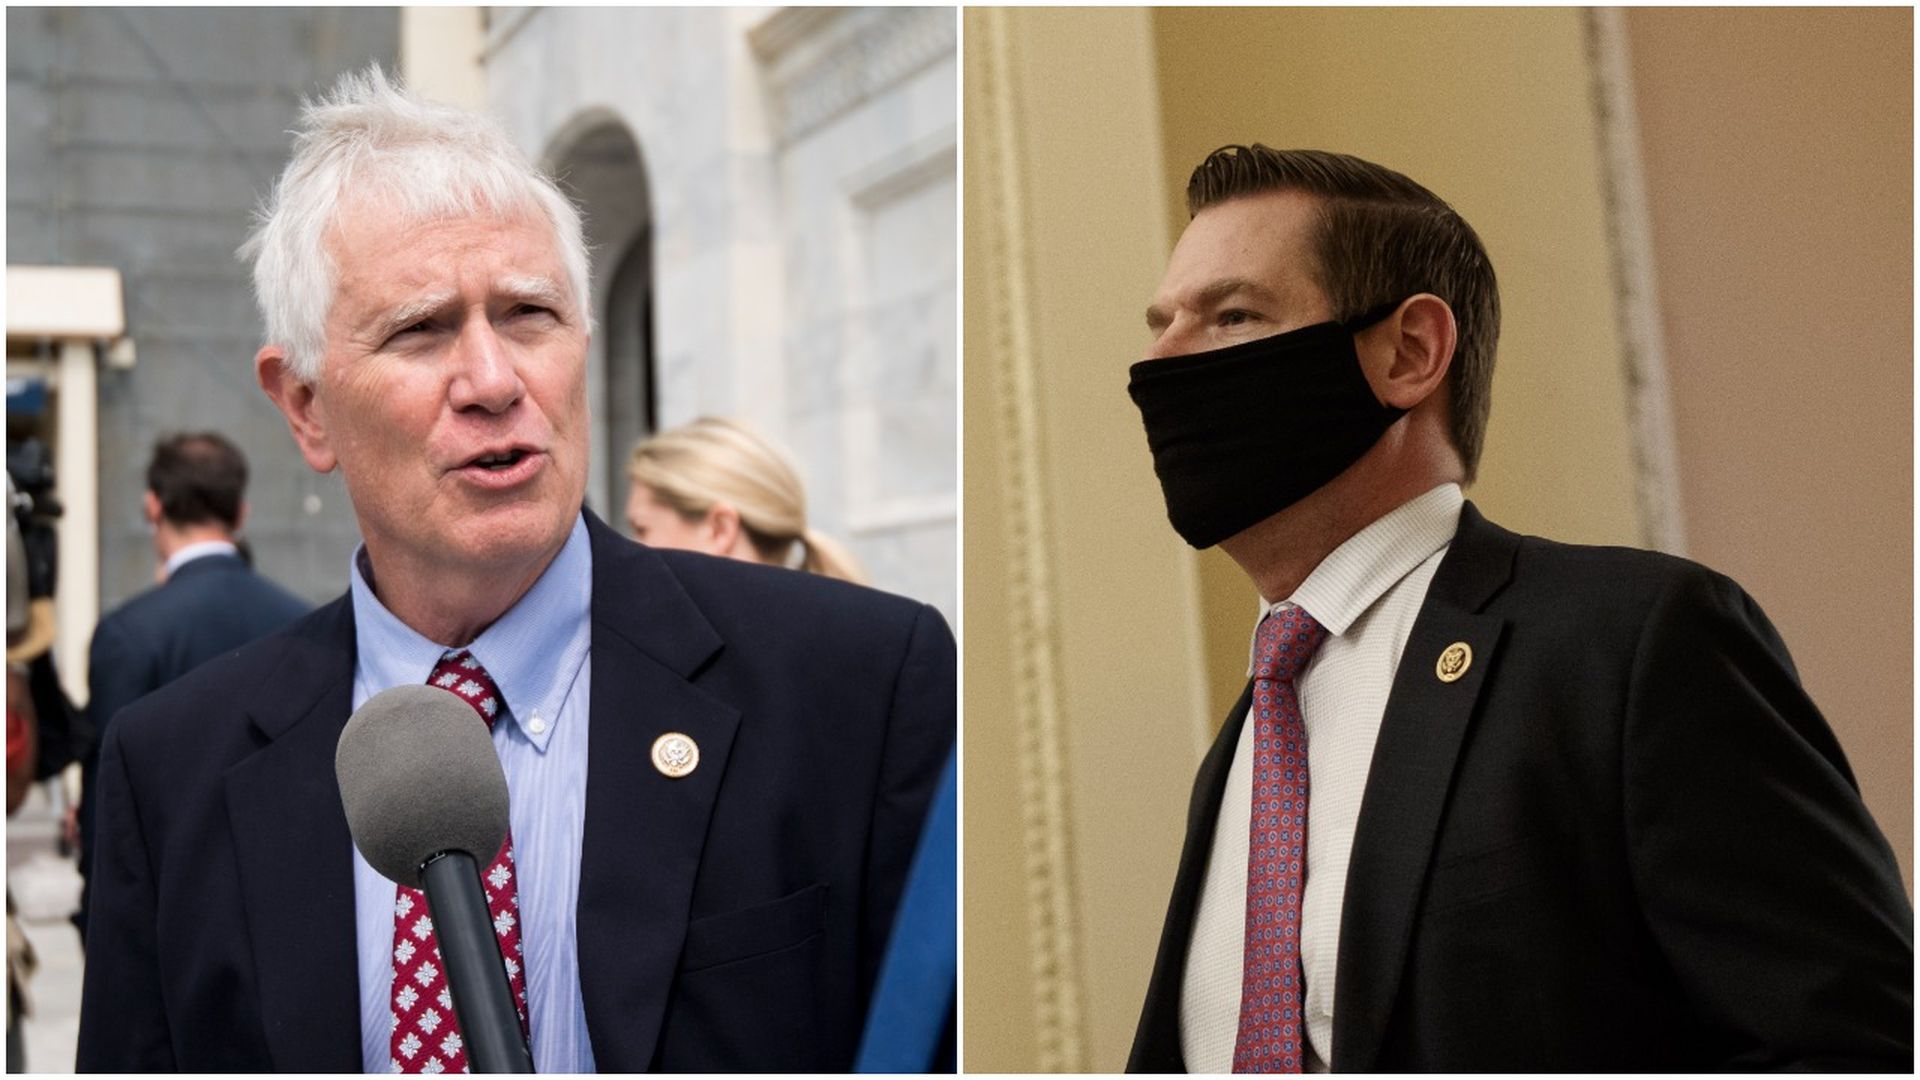 Combination images of Reps. Mo Brooks and Eric Swalwell